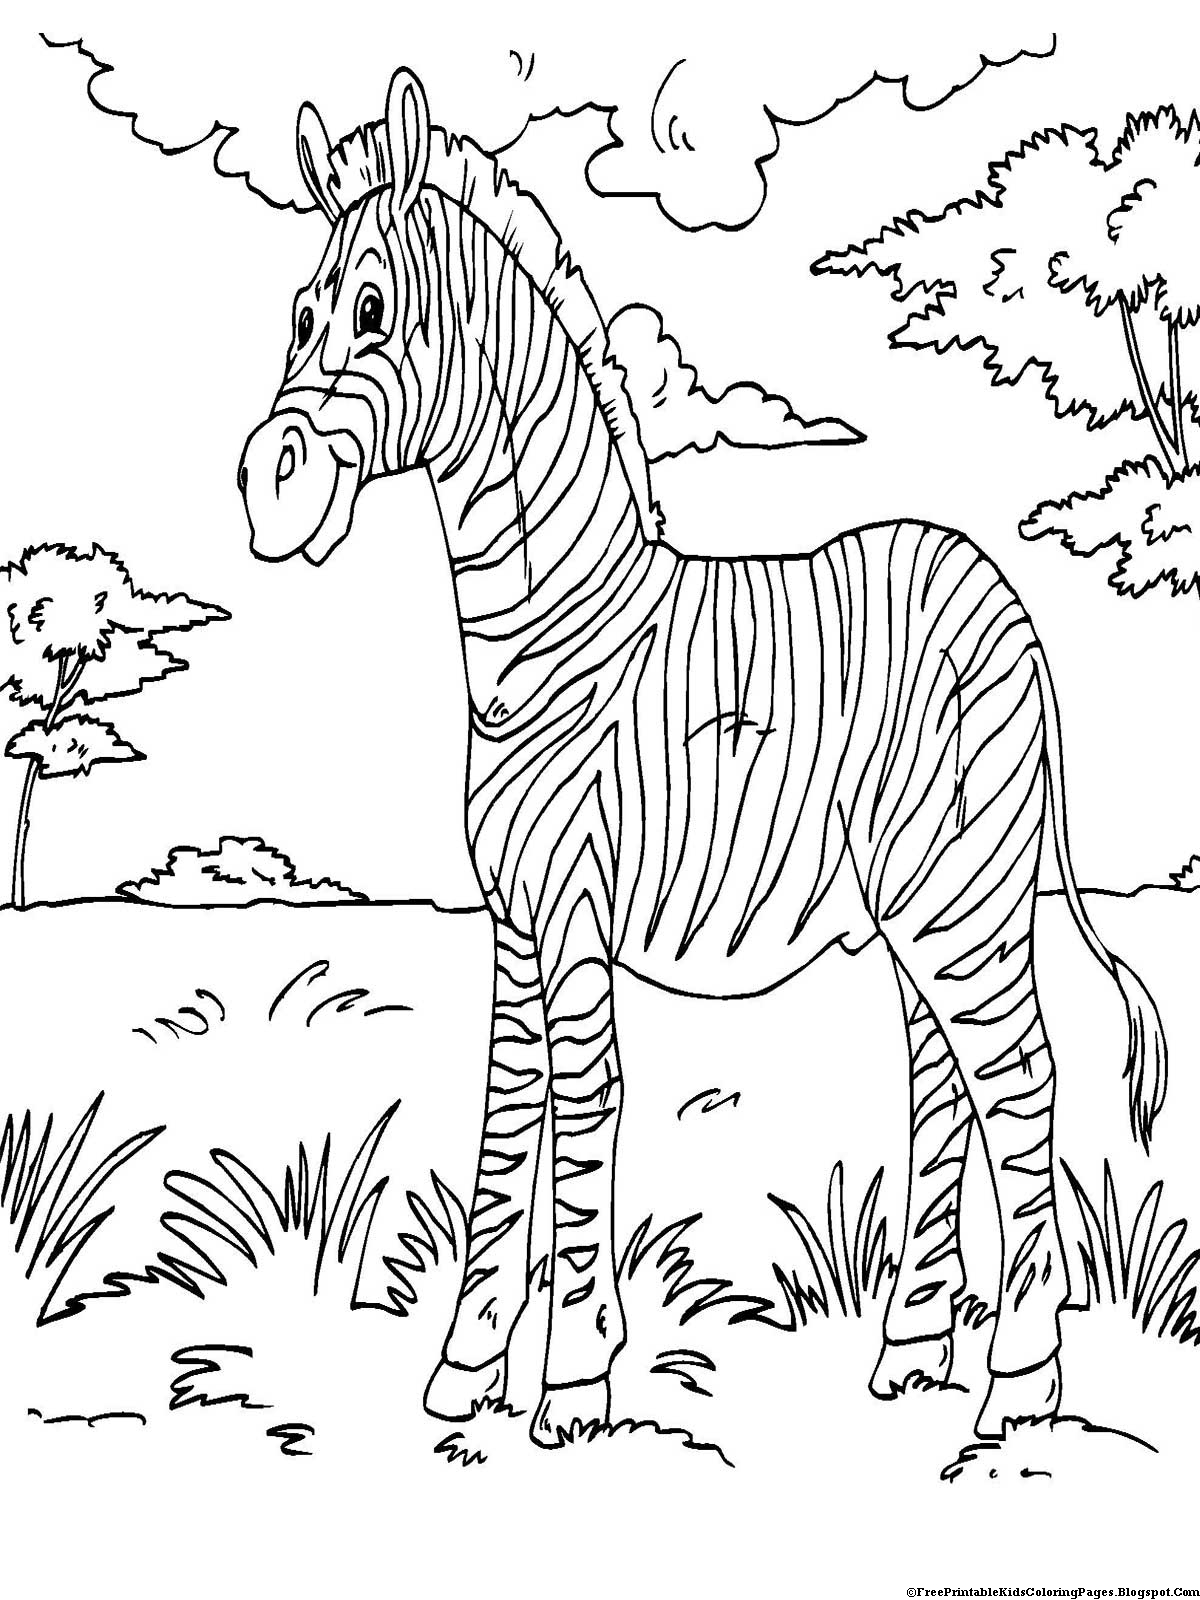 zebra full page coloring pages - photo #27